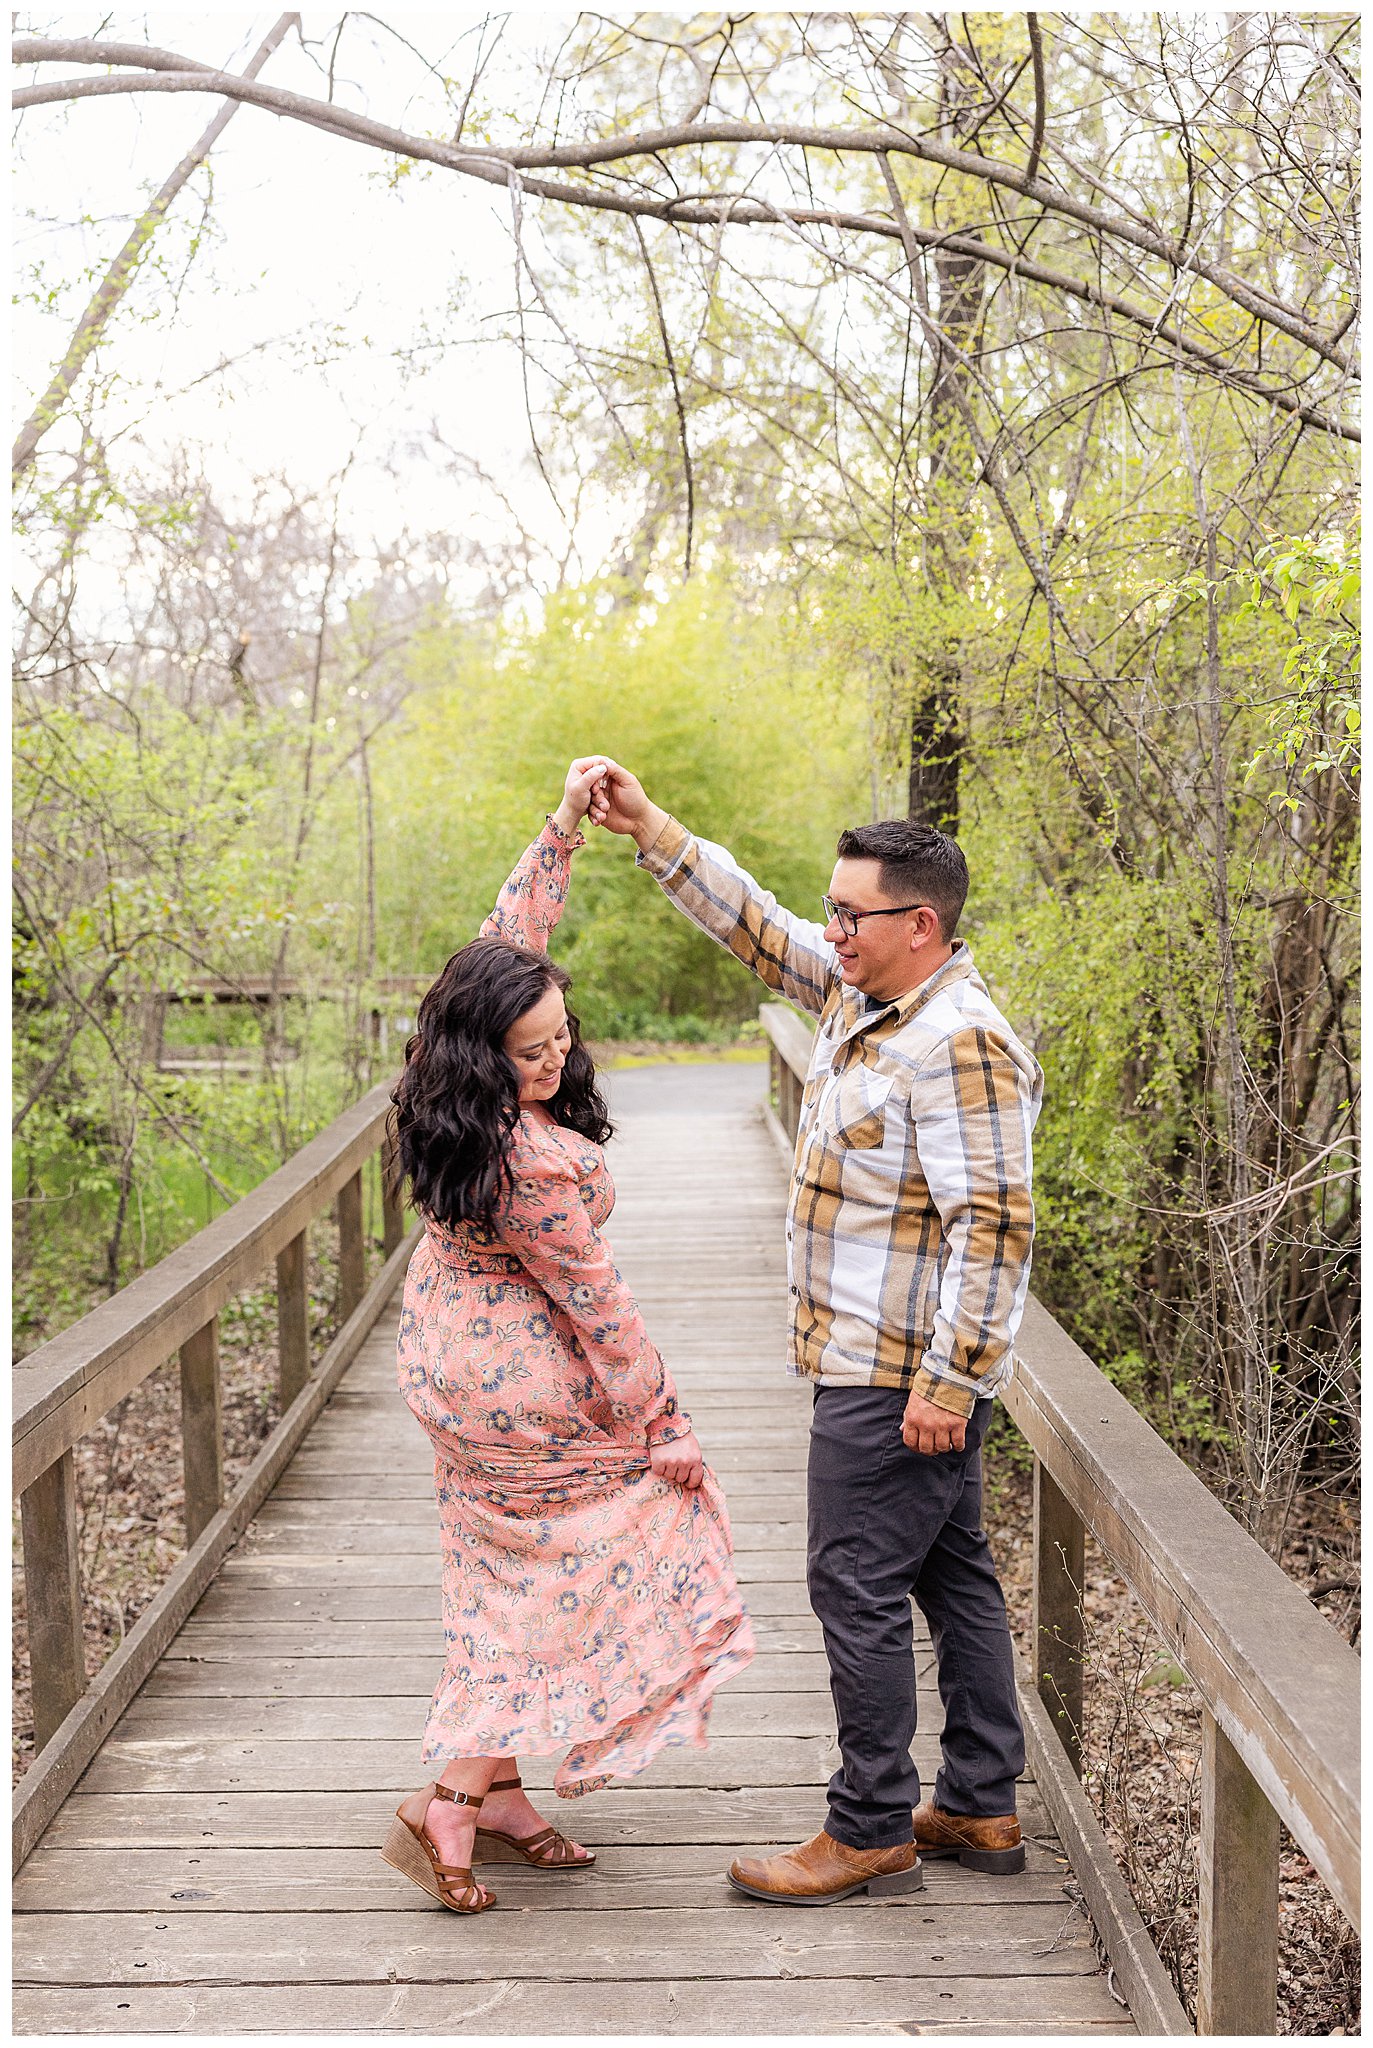 Mendocino National Forest Chico Seed Farm Engagement Session | Kristie + Shawn